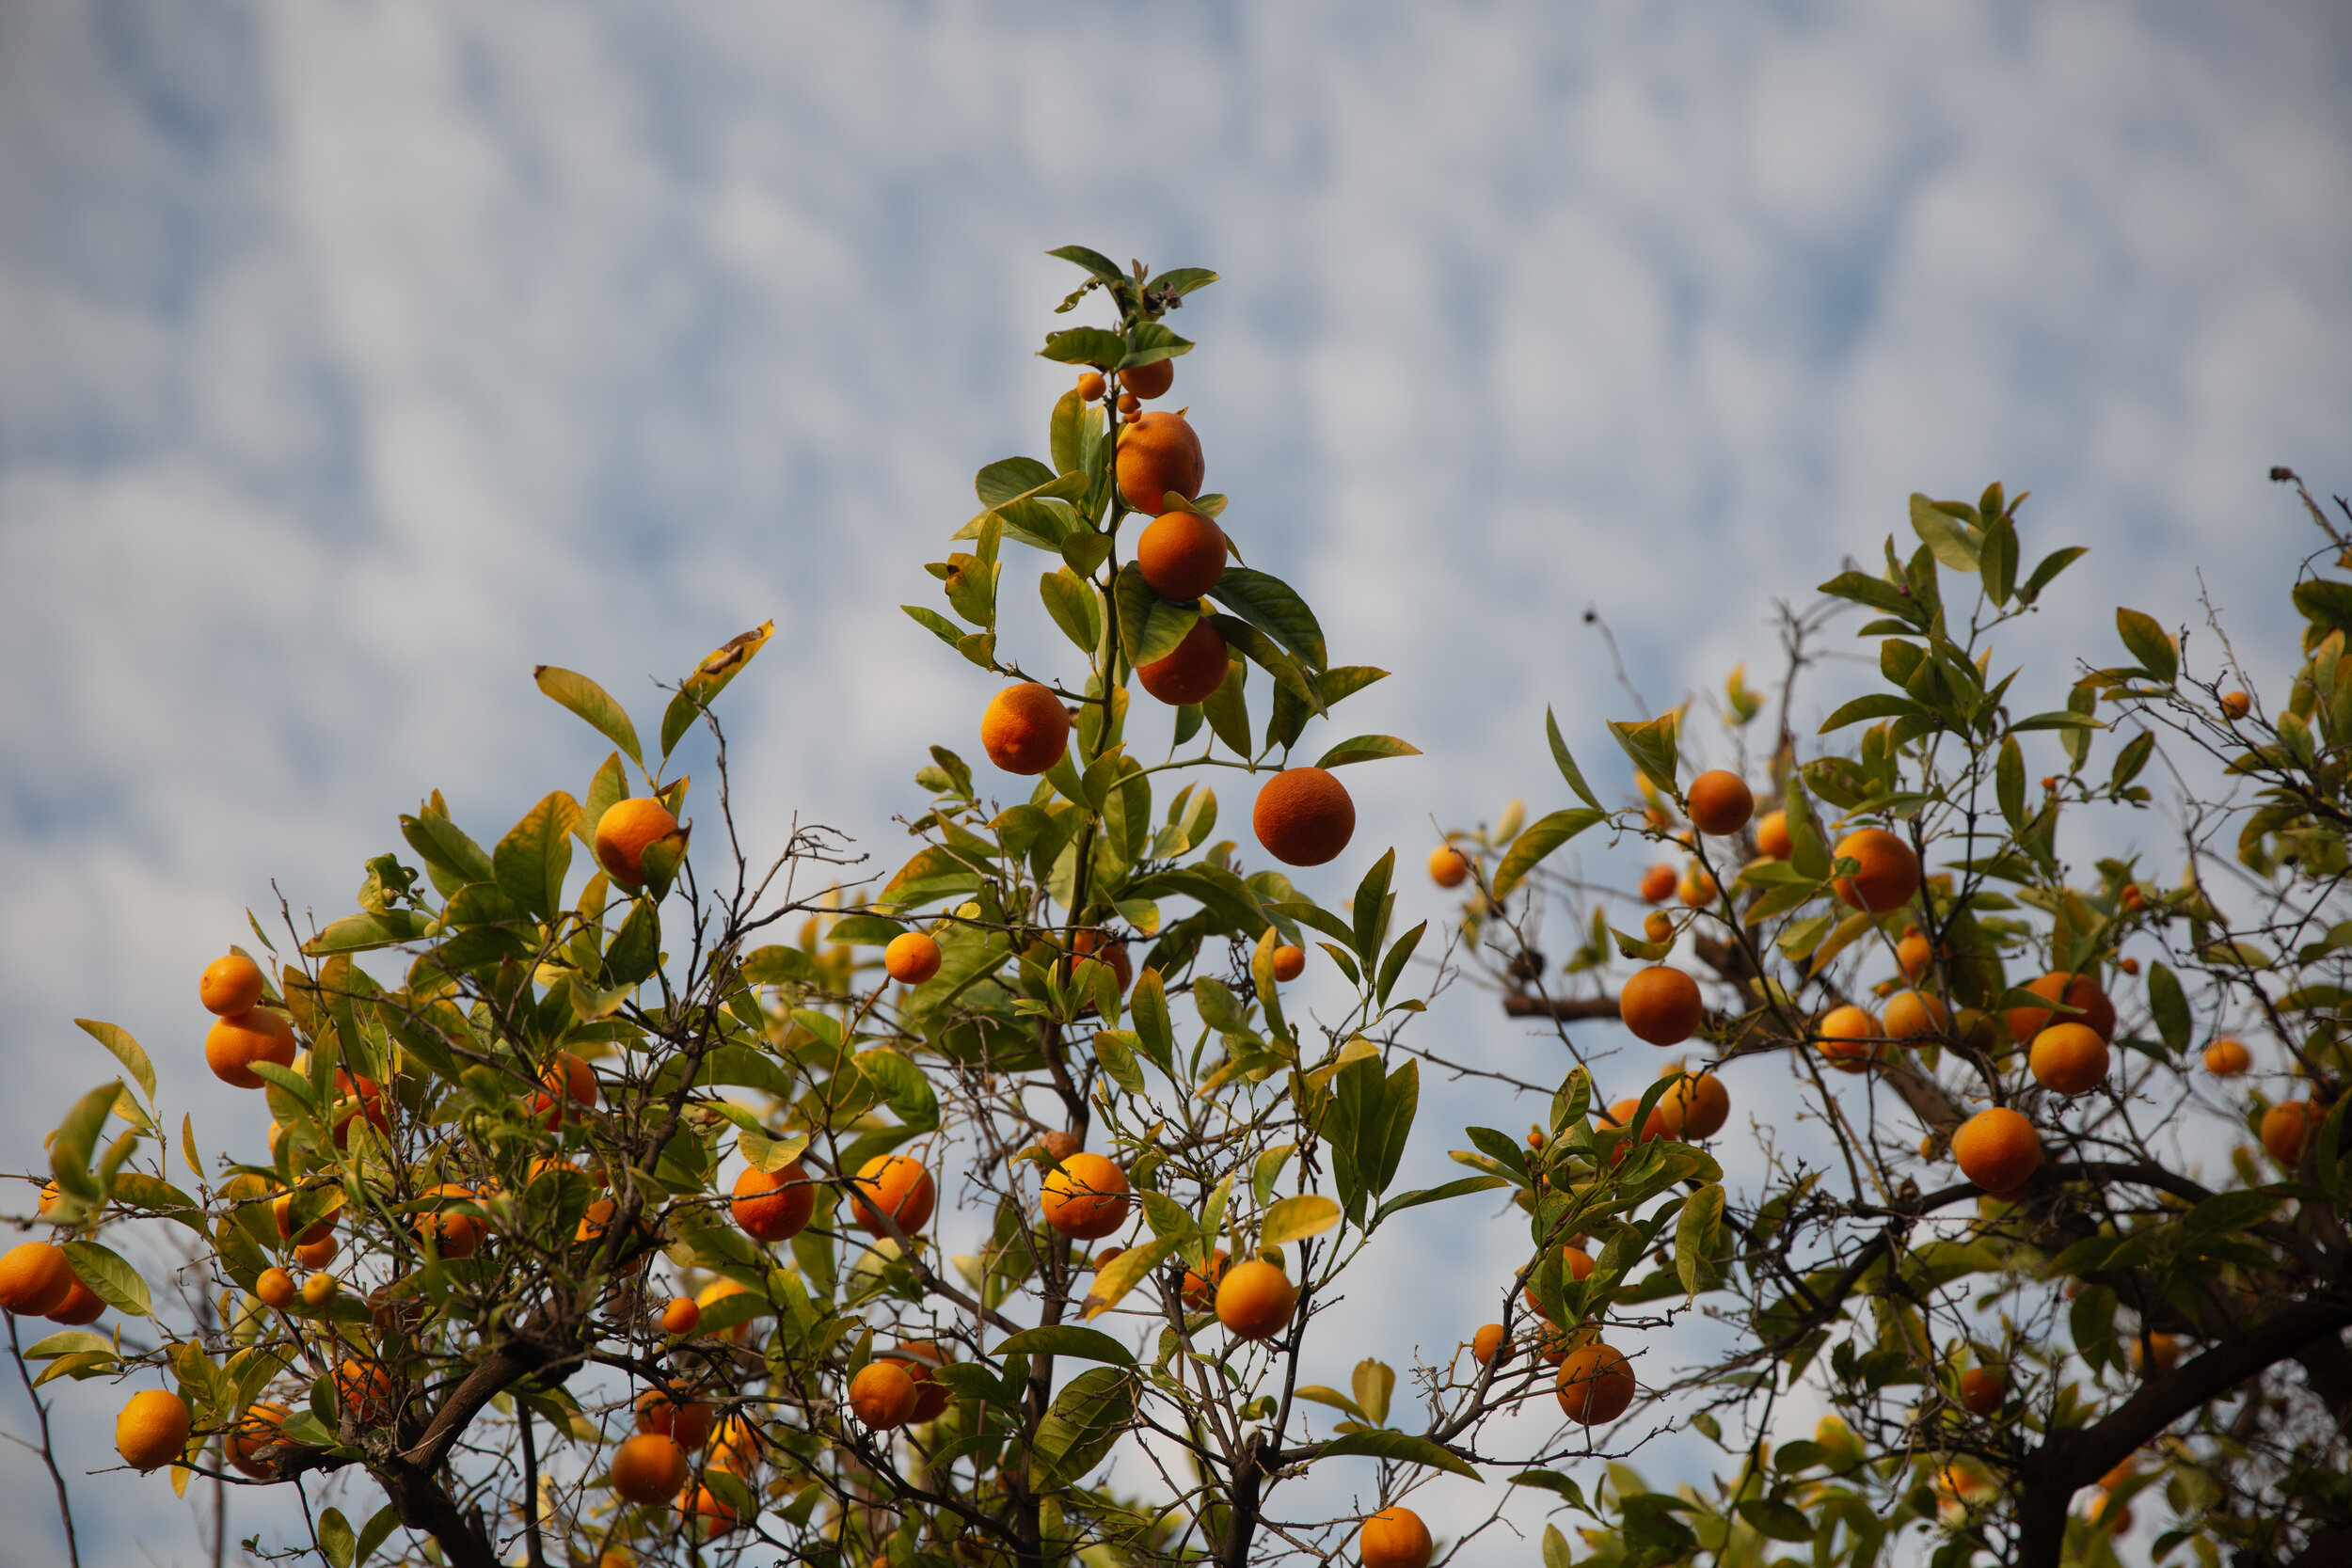  A blossoming orange tree in Los Angeles, CA 